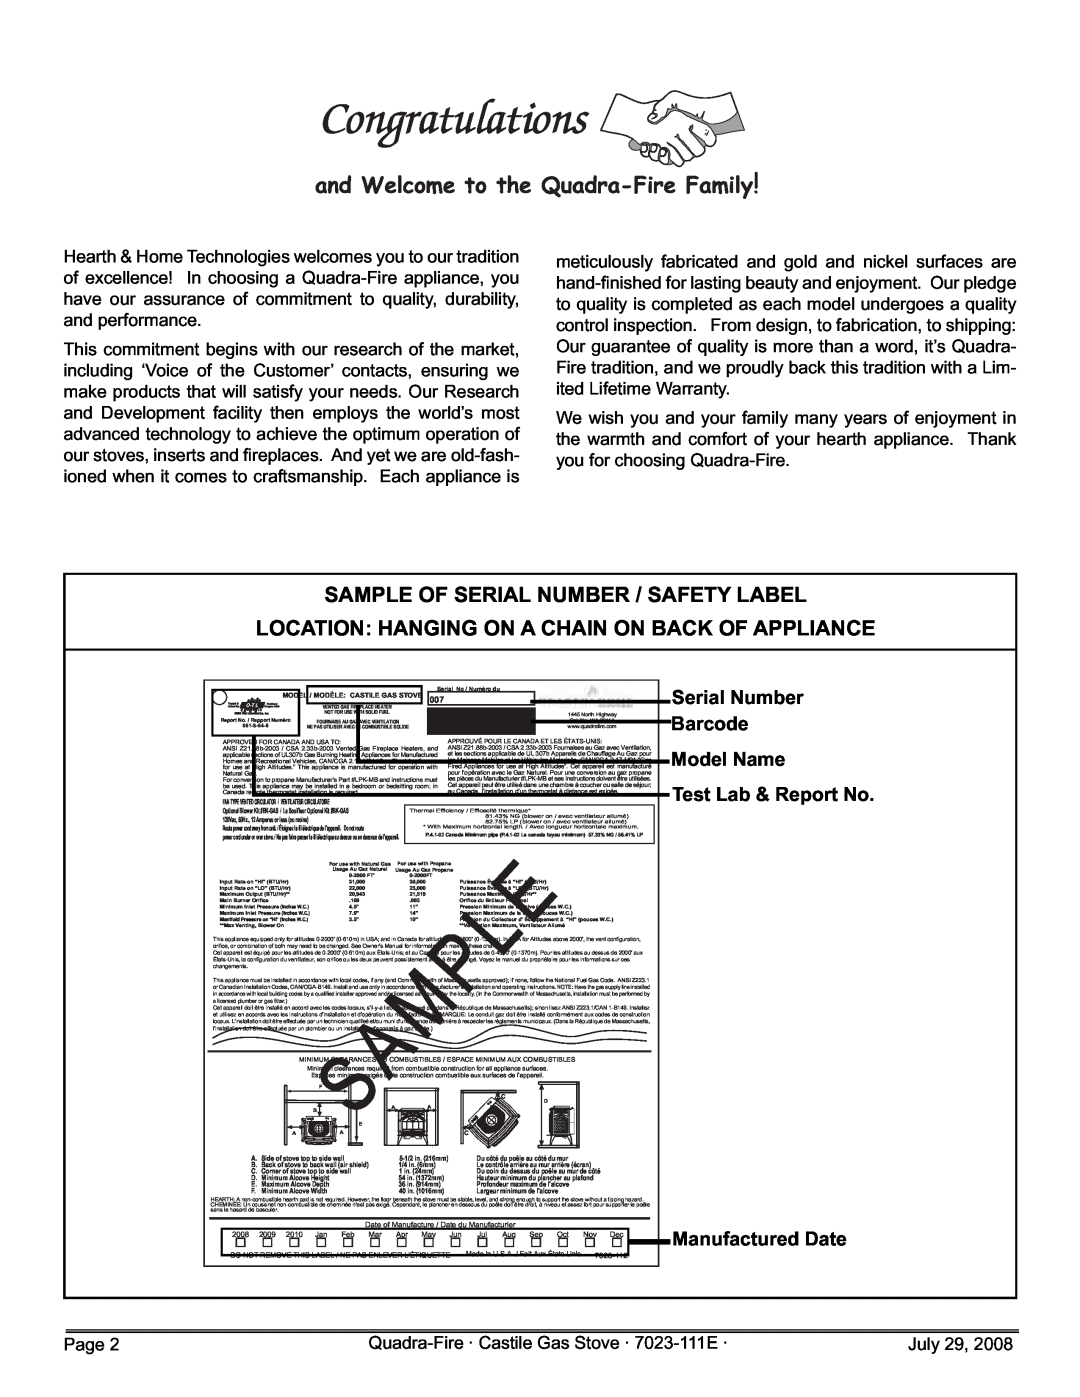 Quadra-Fire 7023-111E owner manual Sample Of Serial Number / Safety Label, Location Hanging On A Chain On Back Of Appliance 